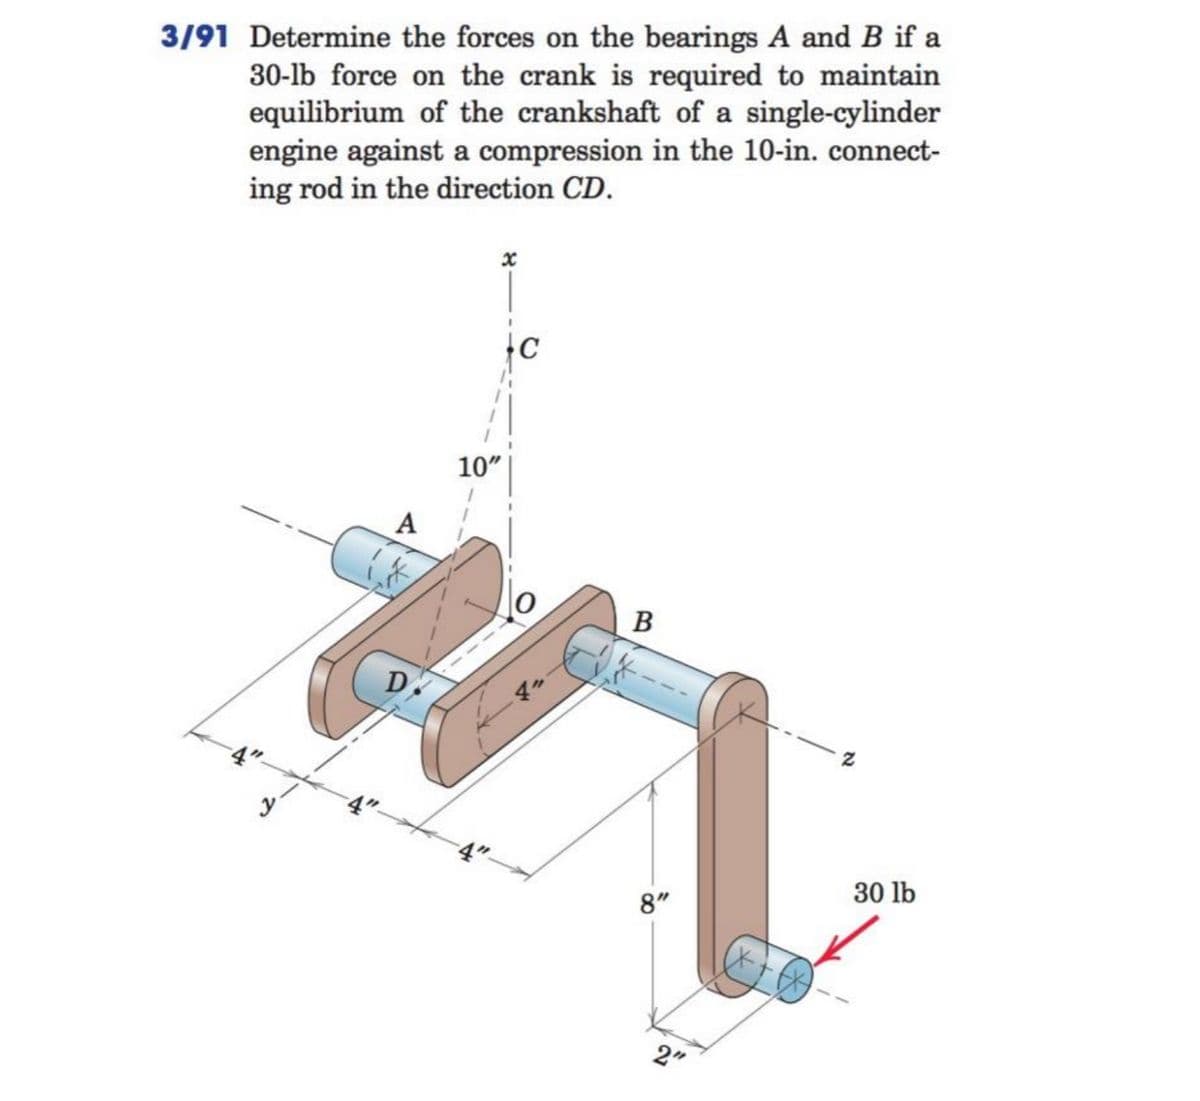 3/91 Determine the forces on the bearings A and B if a
30-lb force on the crank is required to maintain
equilibrium of the crankshaft of a single-cylinder
engine against a compression in the 10-in. connect-
ing rod in the direction CD.
A
D
10"
C
B
8"
2"
30 lb